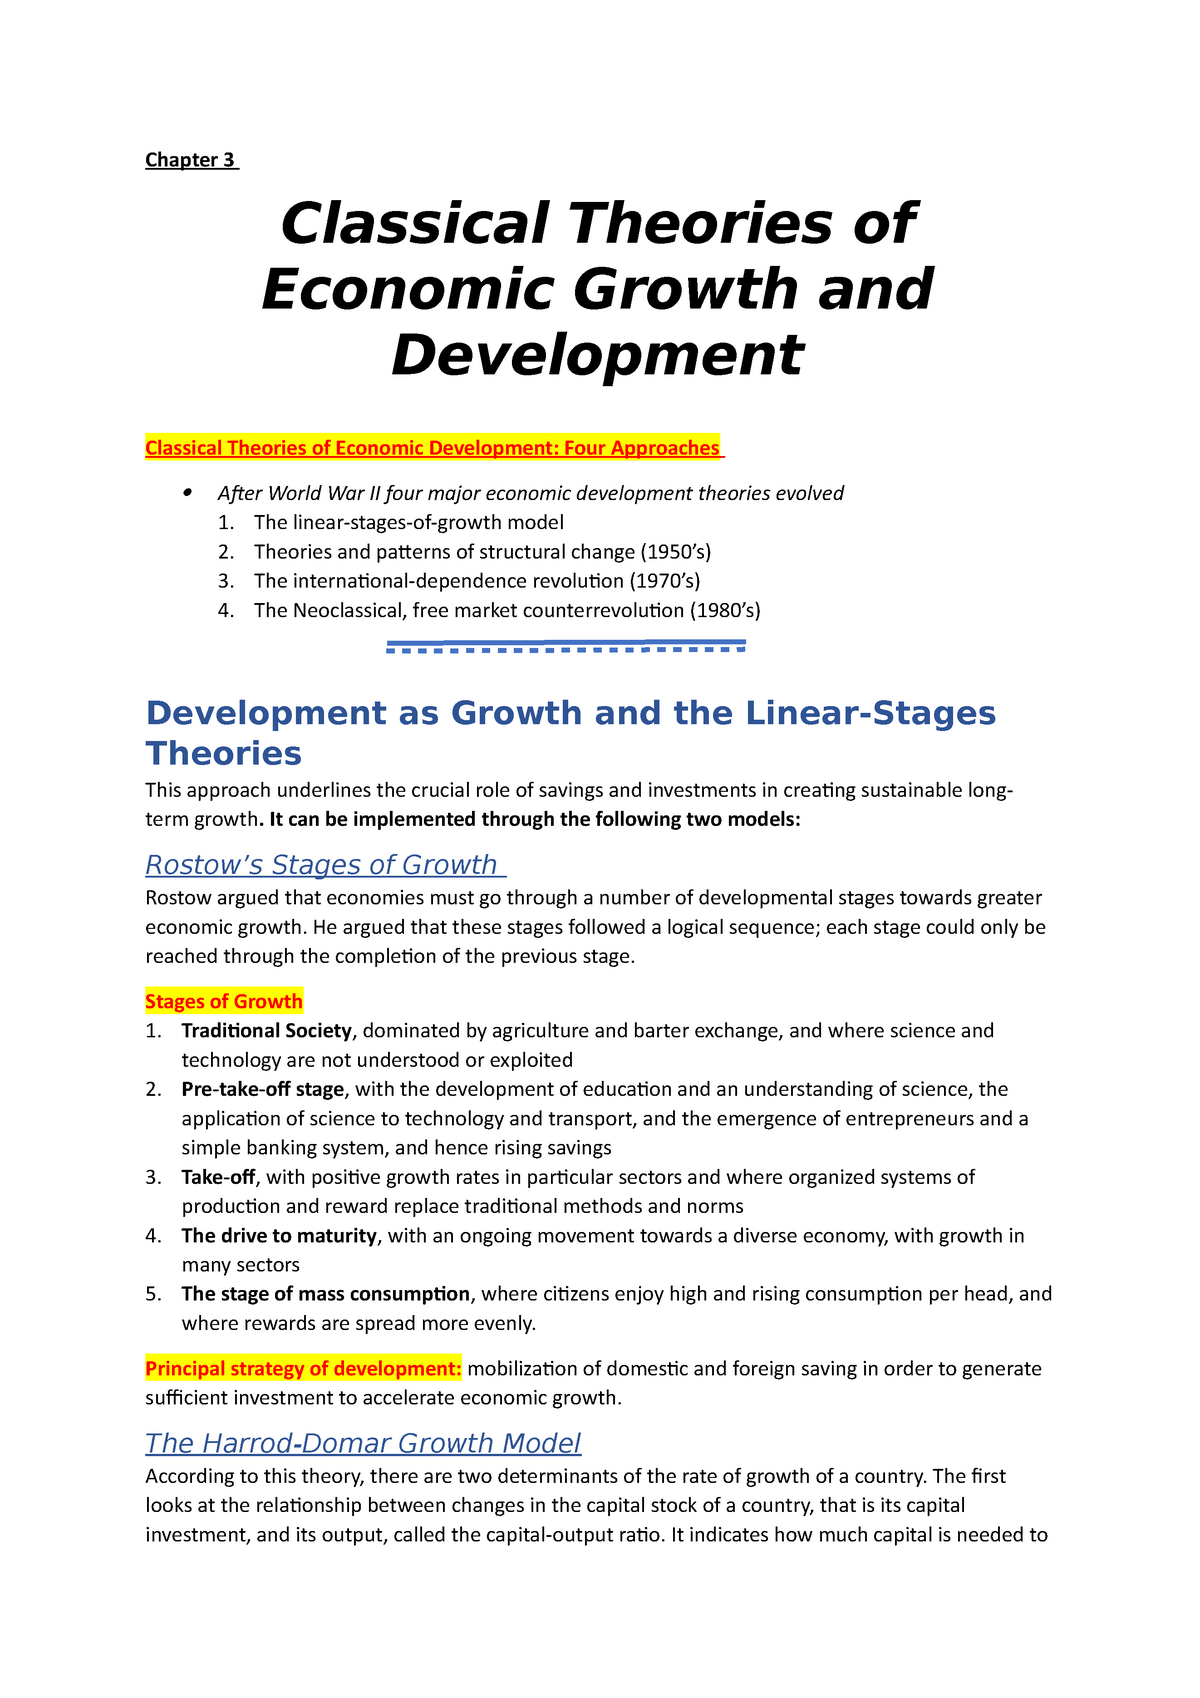 essay about economic growth and development